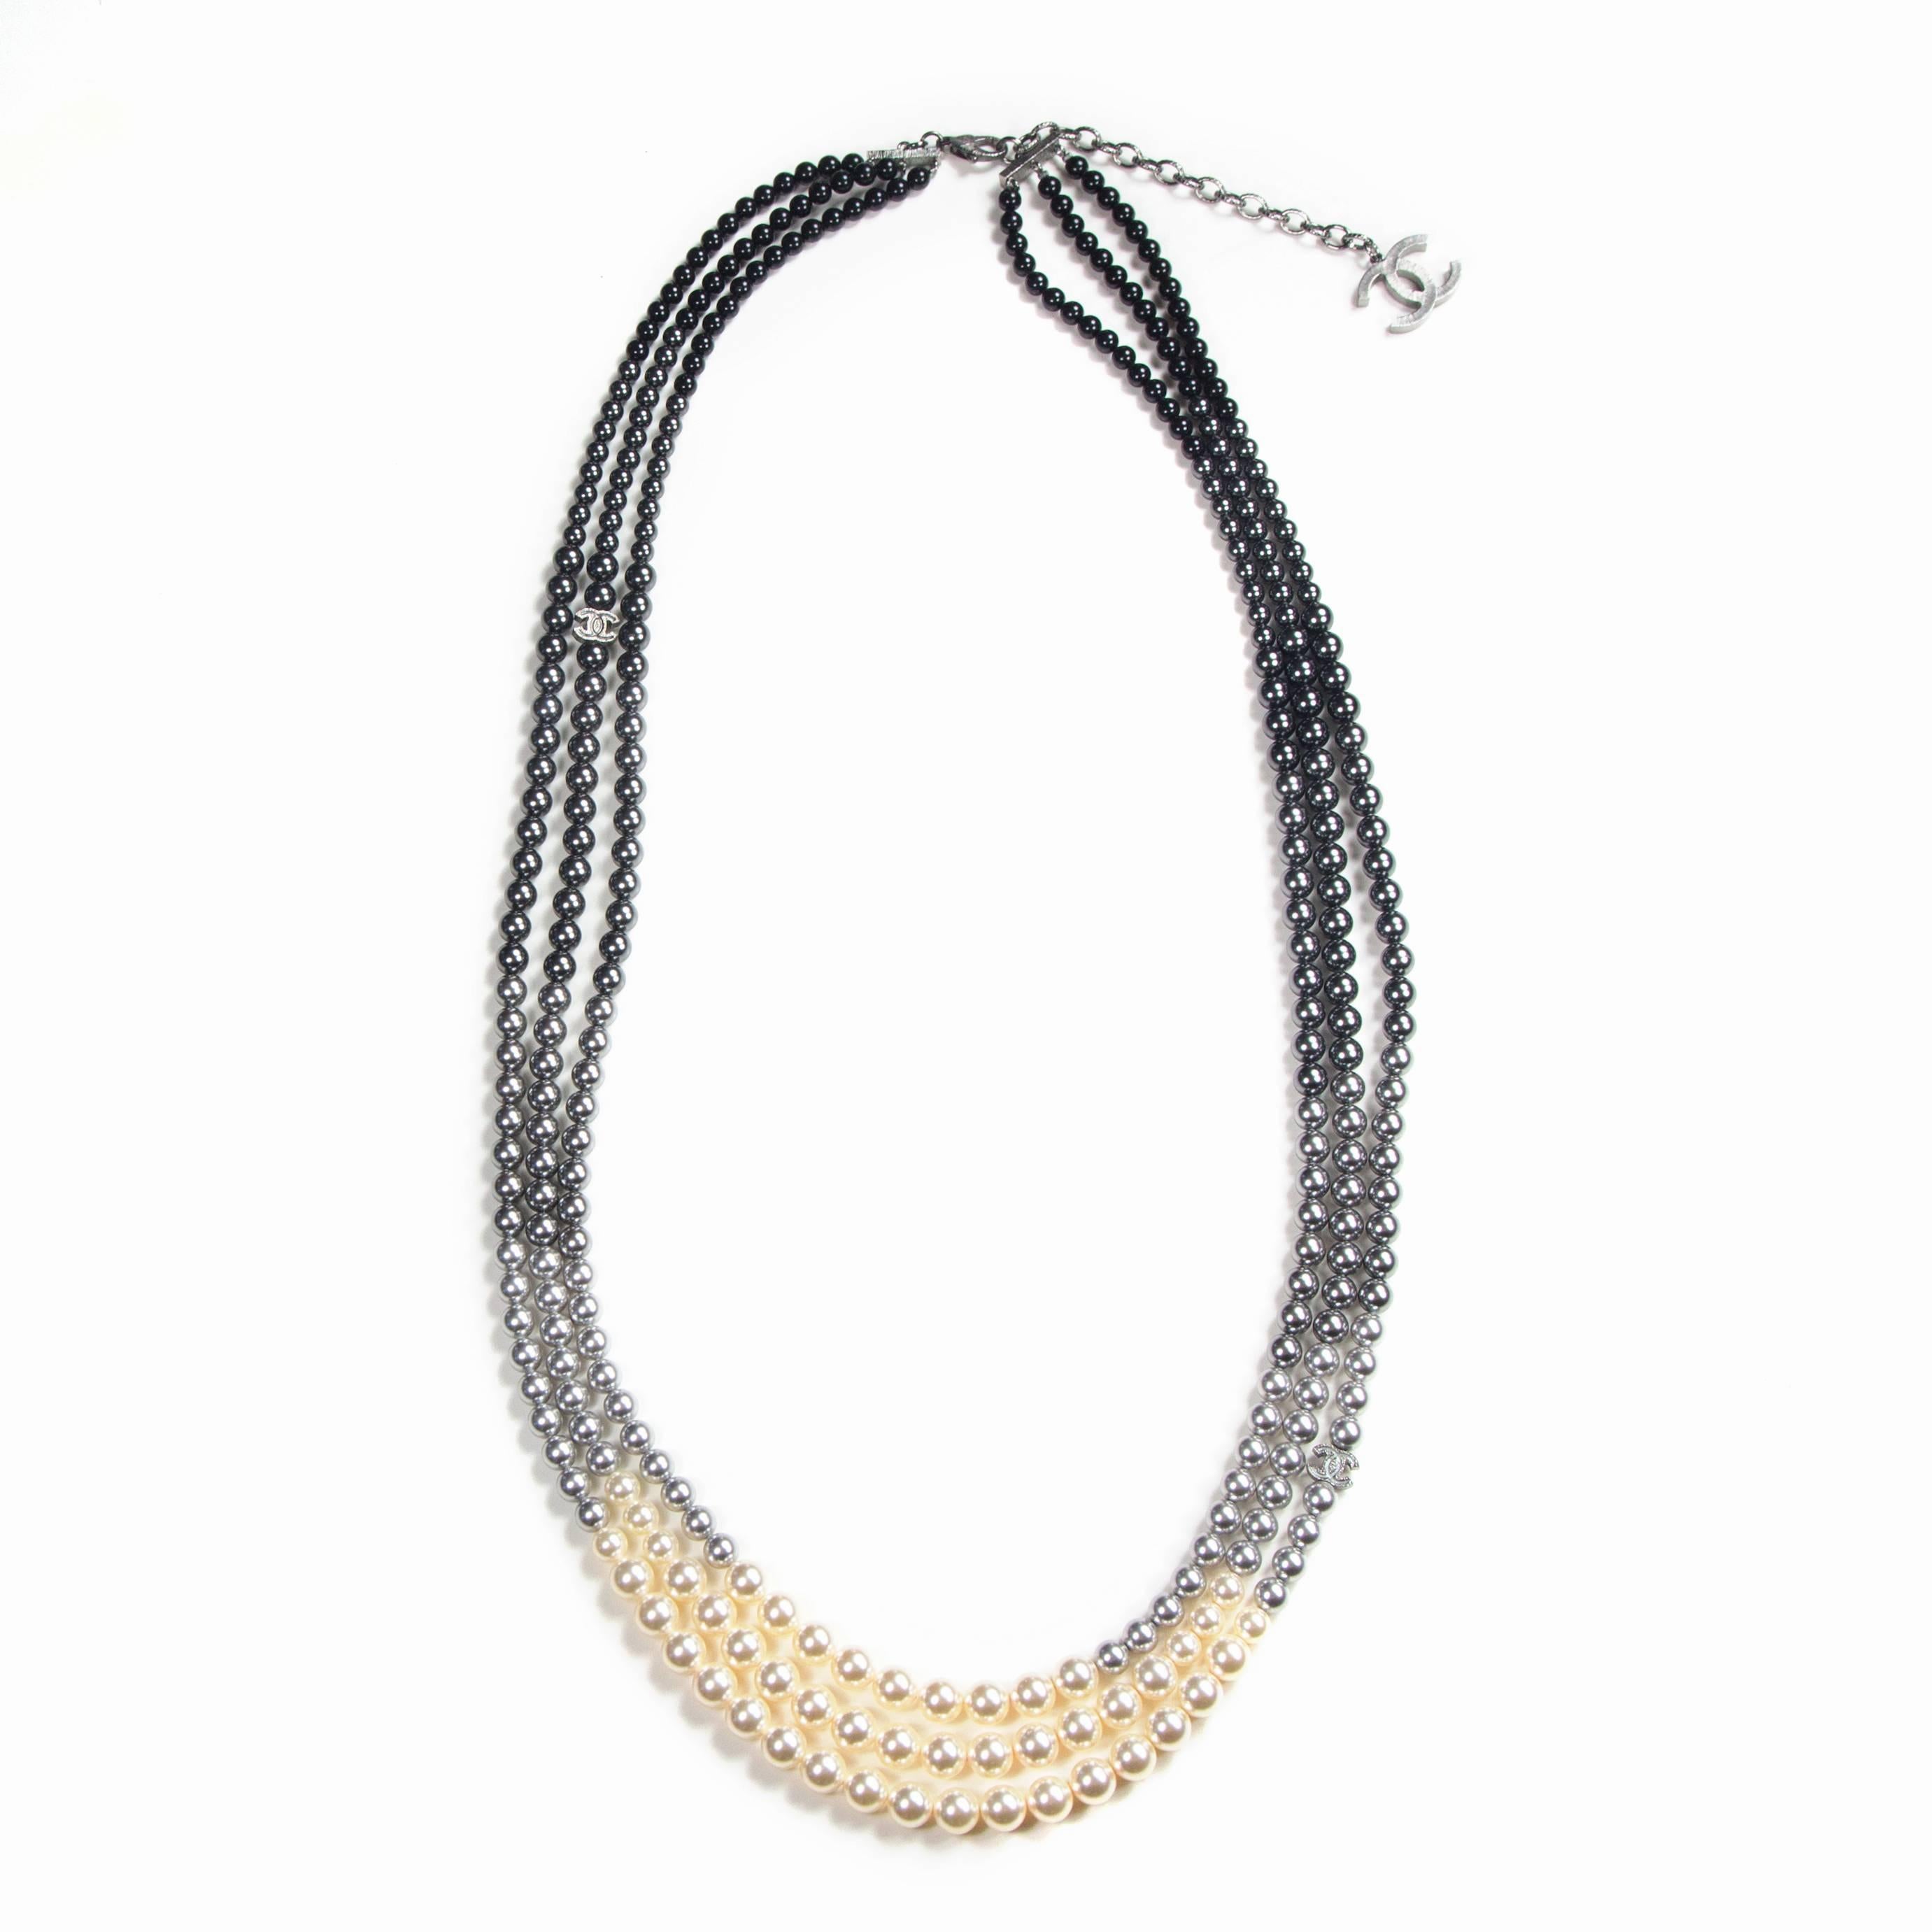 Chanel - 2015 Multistrand Gradient Pearl Necklace 

Color: Silver / Gray / White
 
Material: Pearl Beads
 
------------------------------------------------------------
 
Details:
 
- silver tone hardware

- dark gray to white ombre